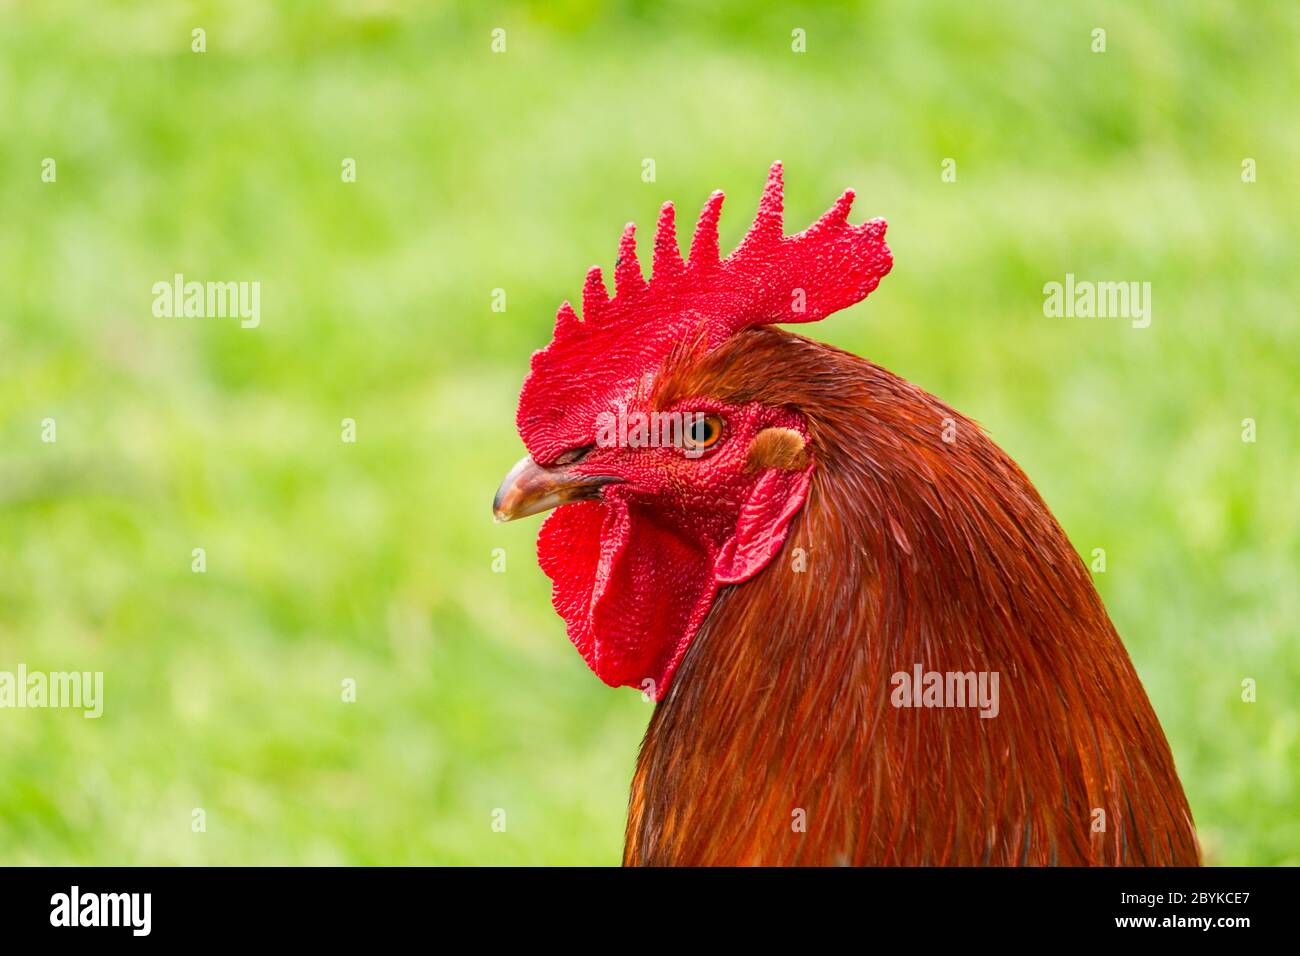 The colorful rooster in the yard. Beautiful feathers of rooster. Rooster farm bird. Fighting rooster in summer garden. Colorful rooster close photo. D Stock Photo